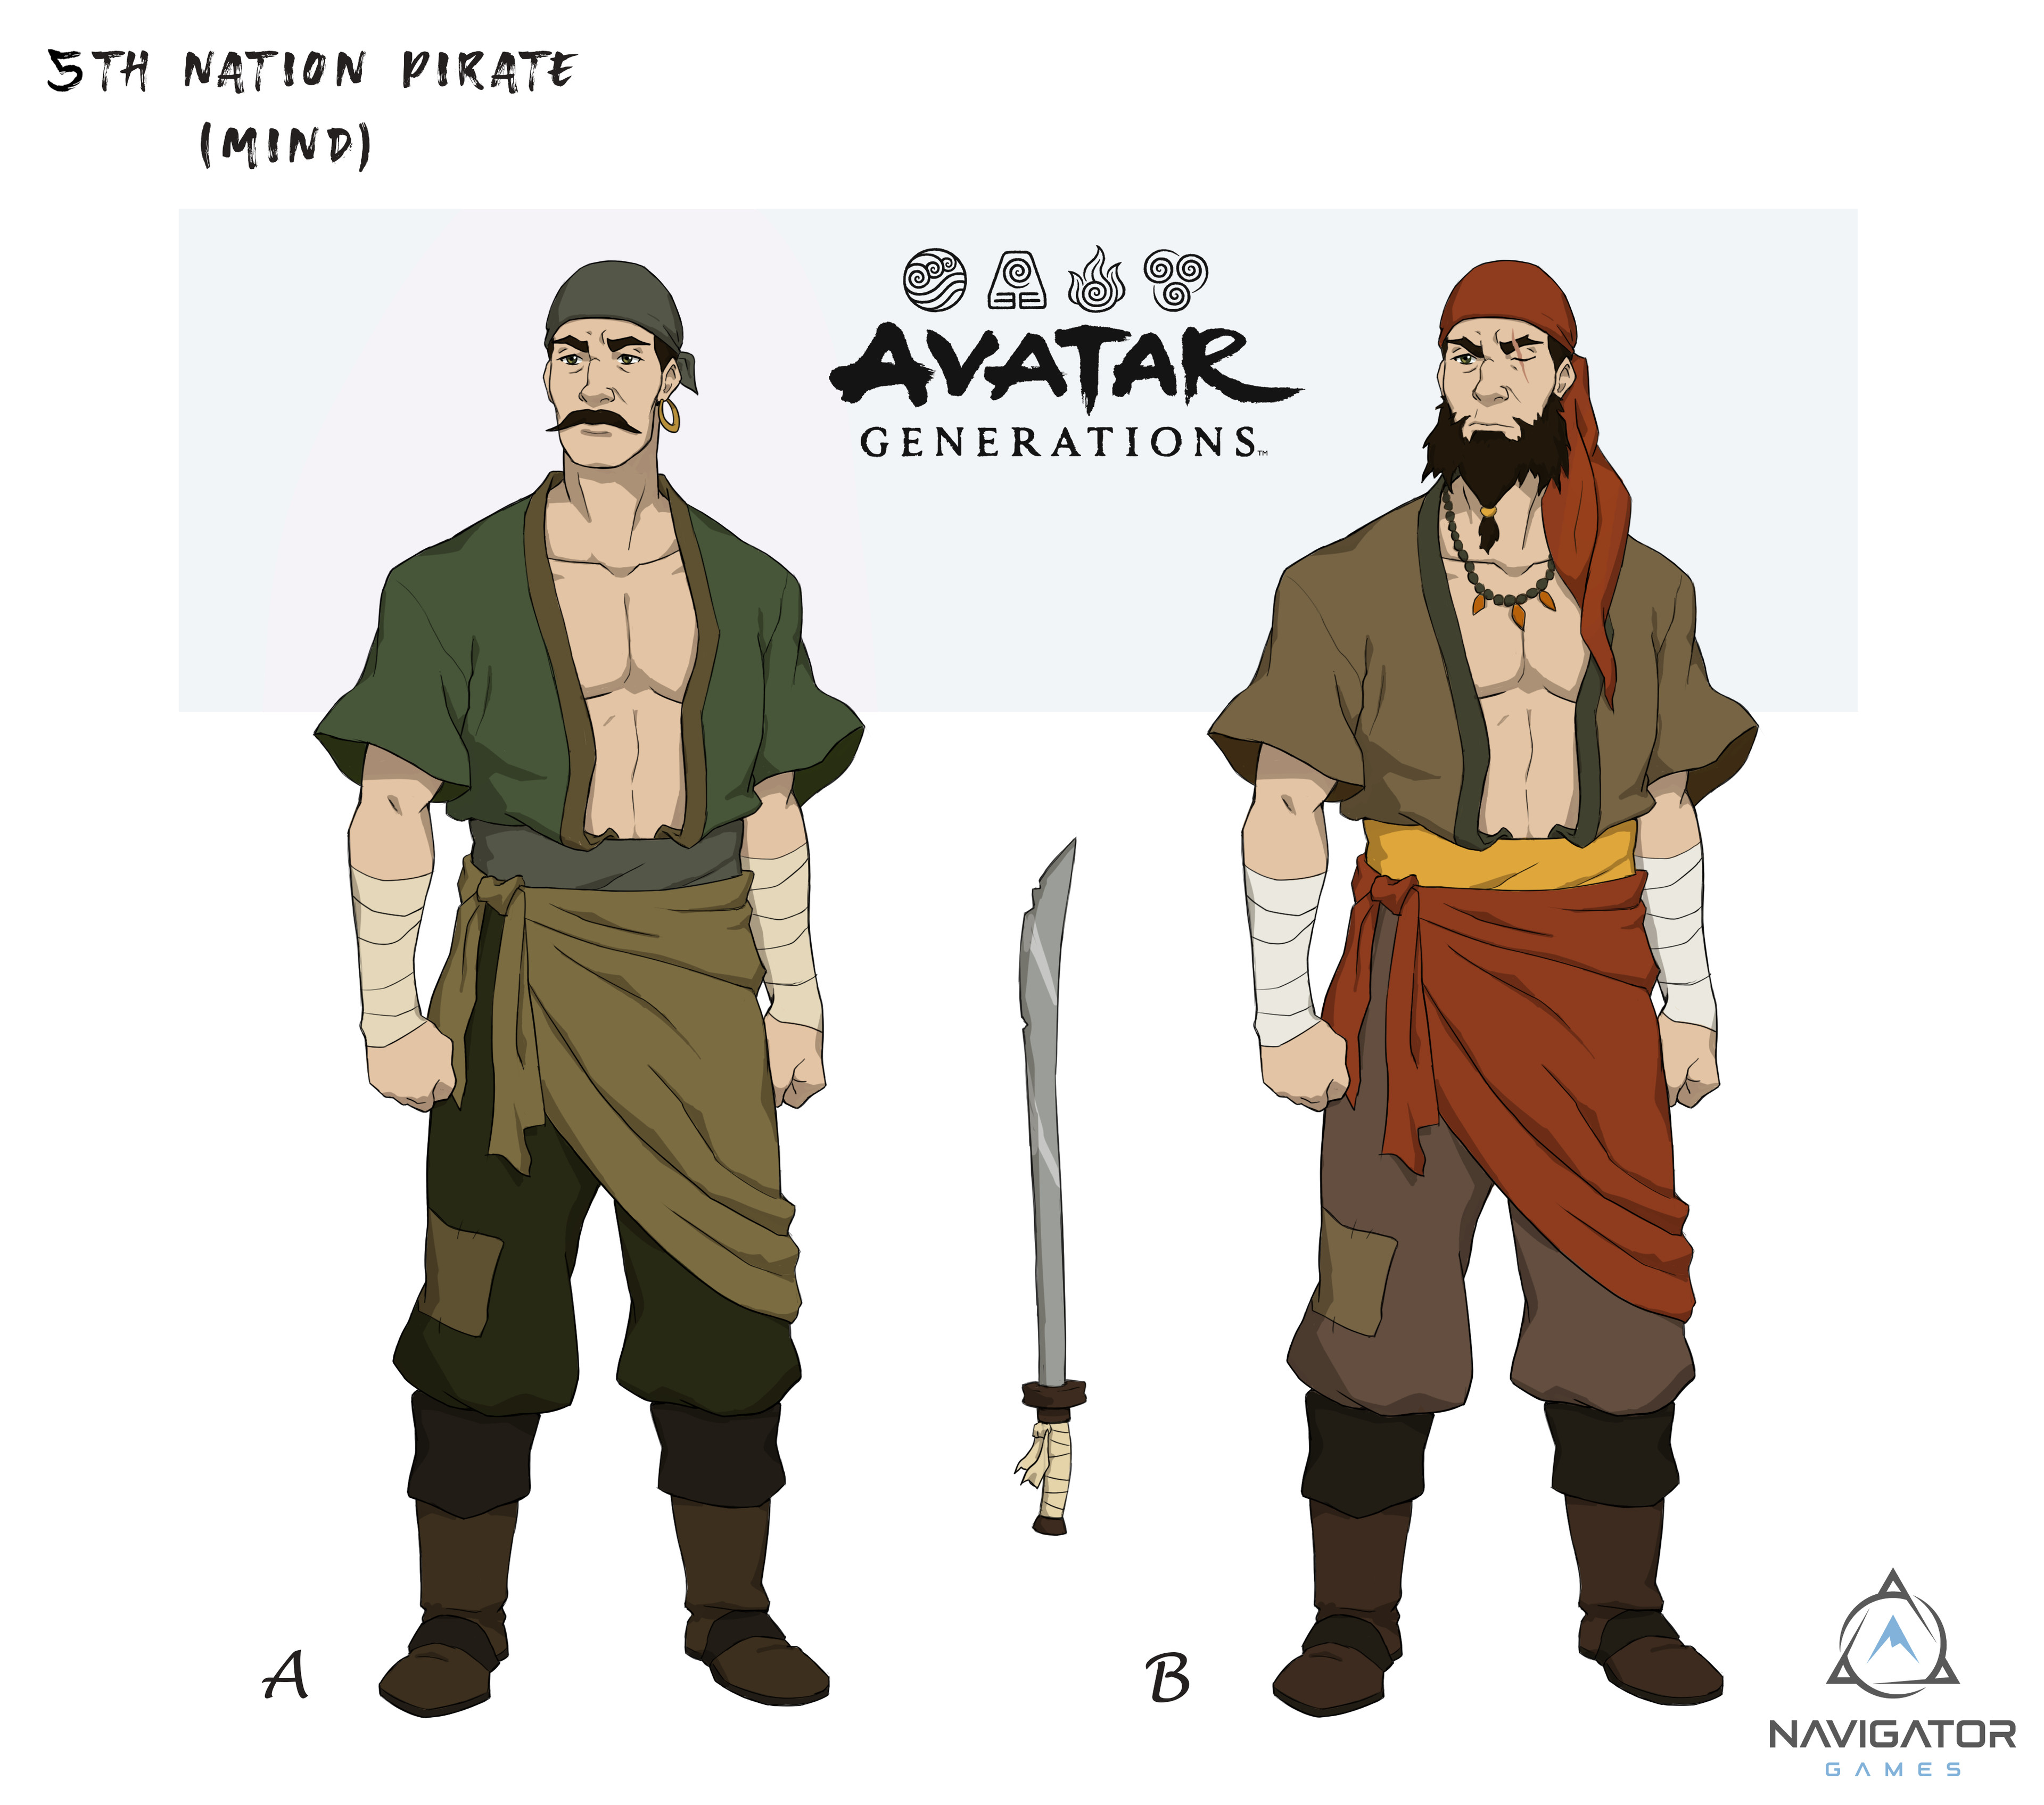 Options for a pirate character